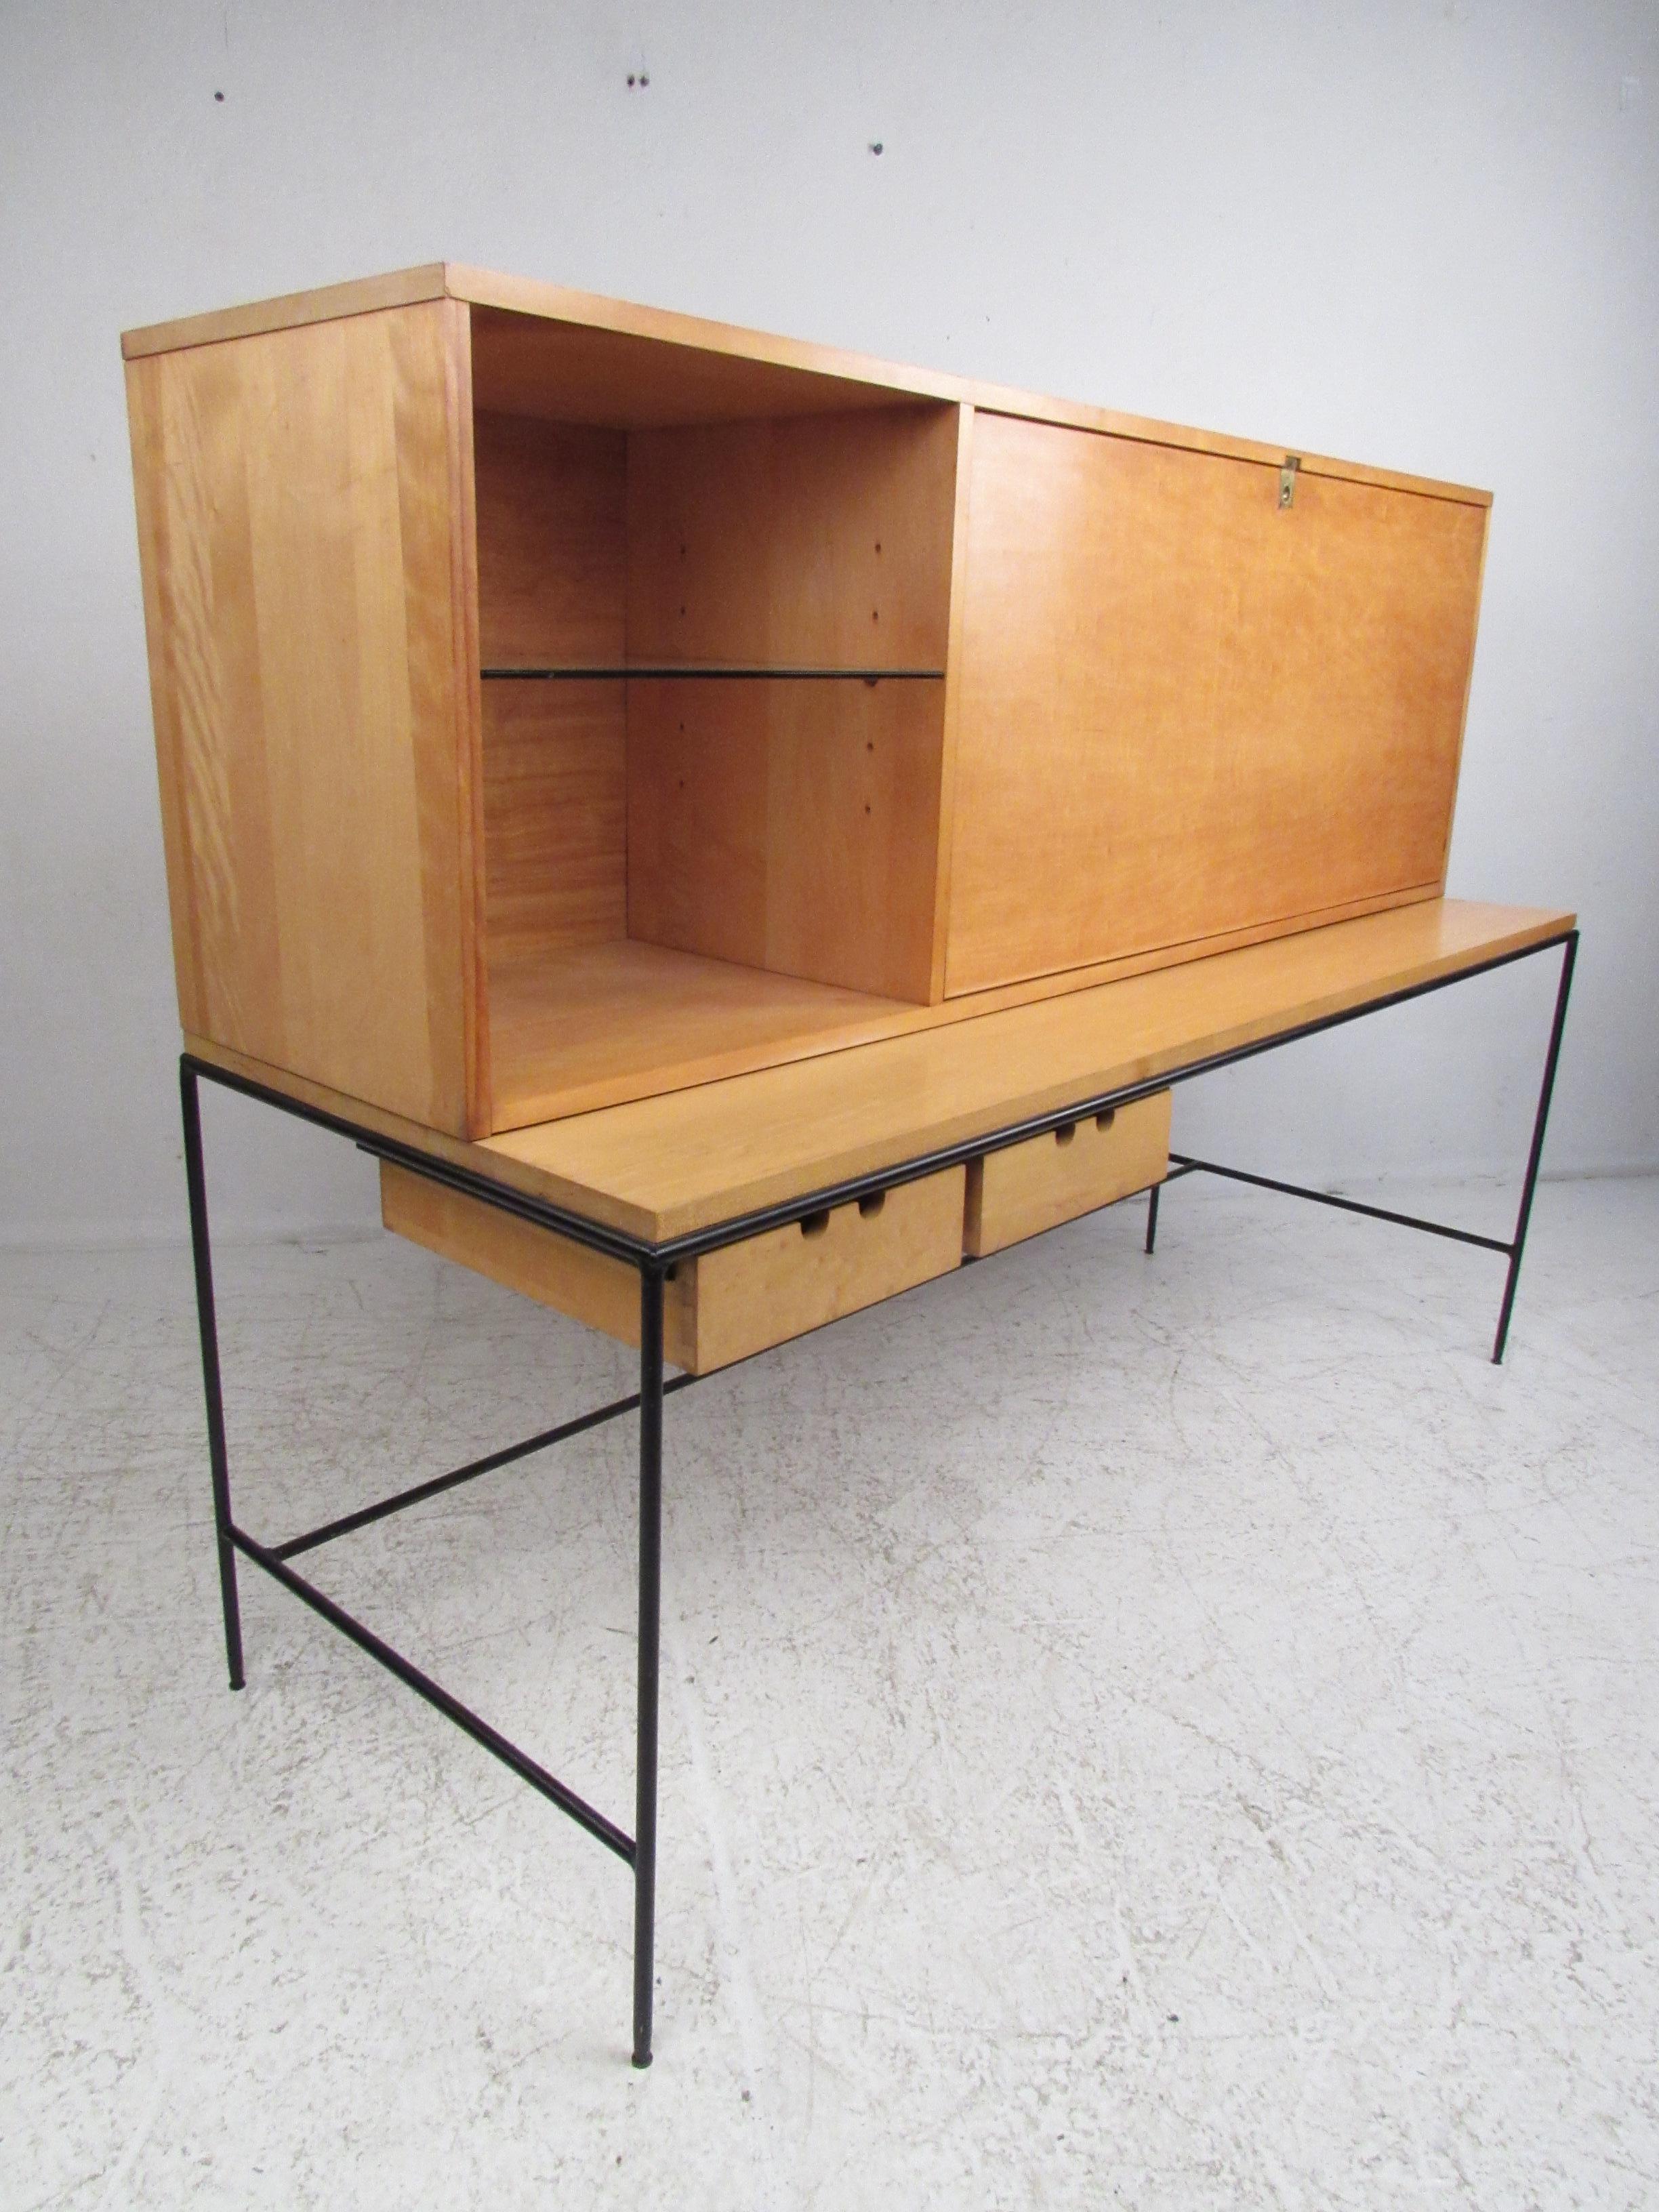 This beautiful vintage modern desk features an enameled steel frame and a maple casing. A stylish design that boasts a large drop front hiding a large compartment and drawers for storage. This rare two-piece desk offers plenty of work space without